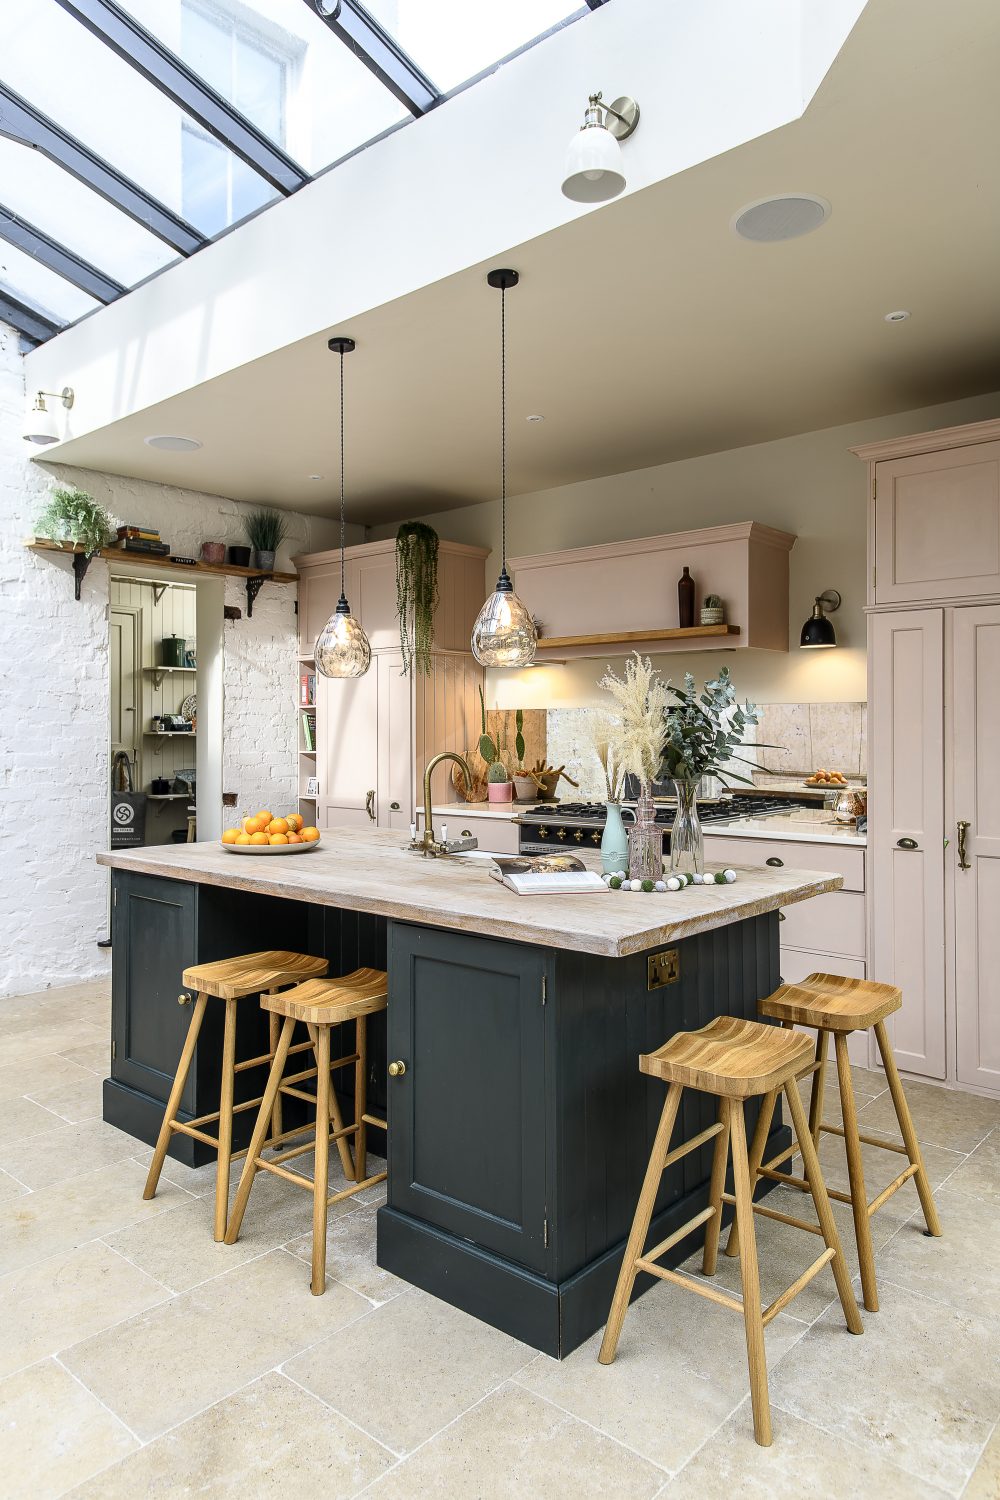 The kitchen has the feel of an orangery, occupying the width of the house, with a generous island unit, underfloor heating and a hardwearing La Rochelle limestone, a pale natural stone that enhances the bright airiness of the room 